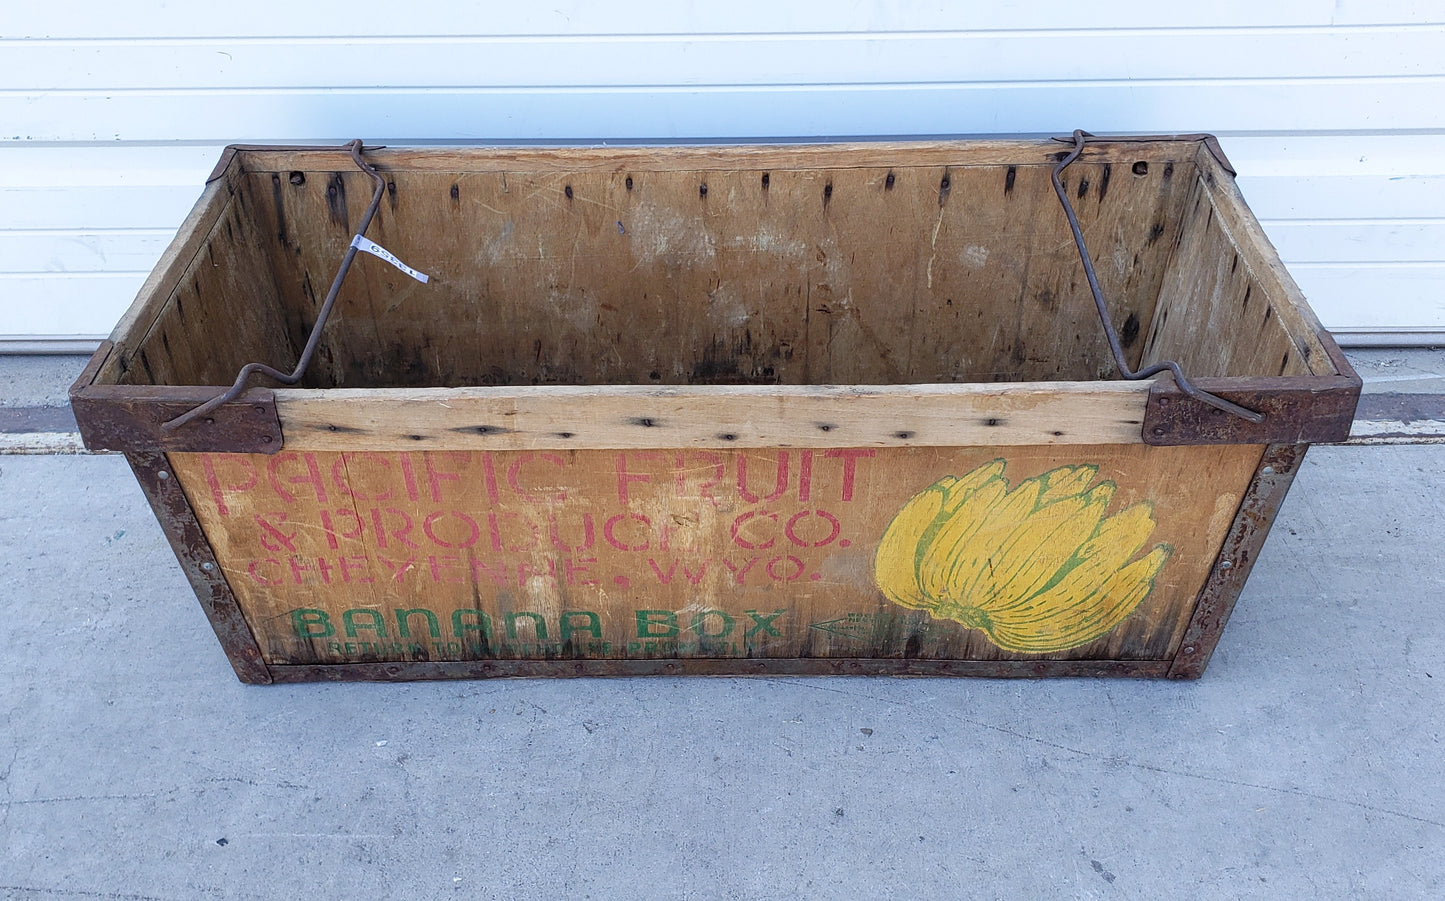 Pacific Fruit & Produce Banana Crate